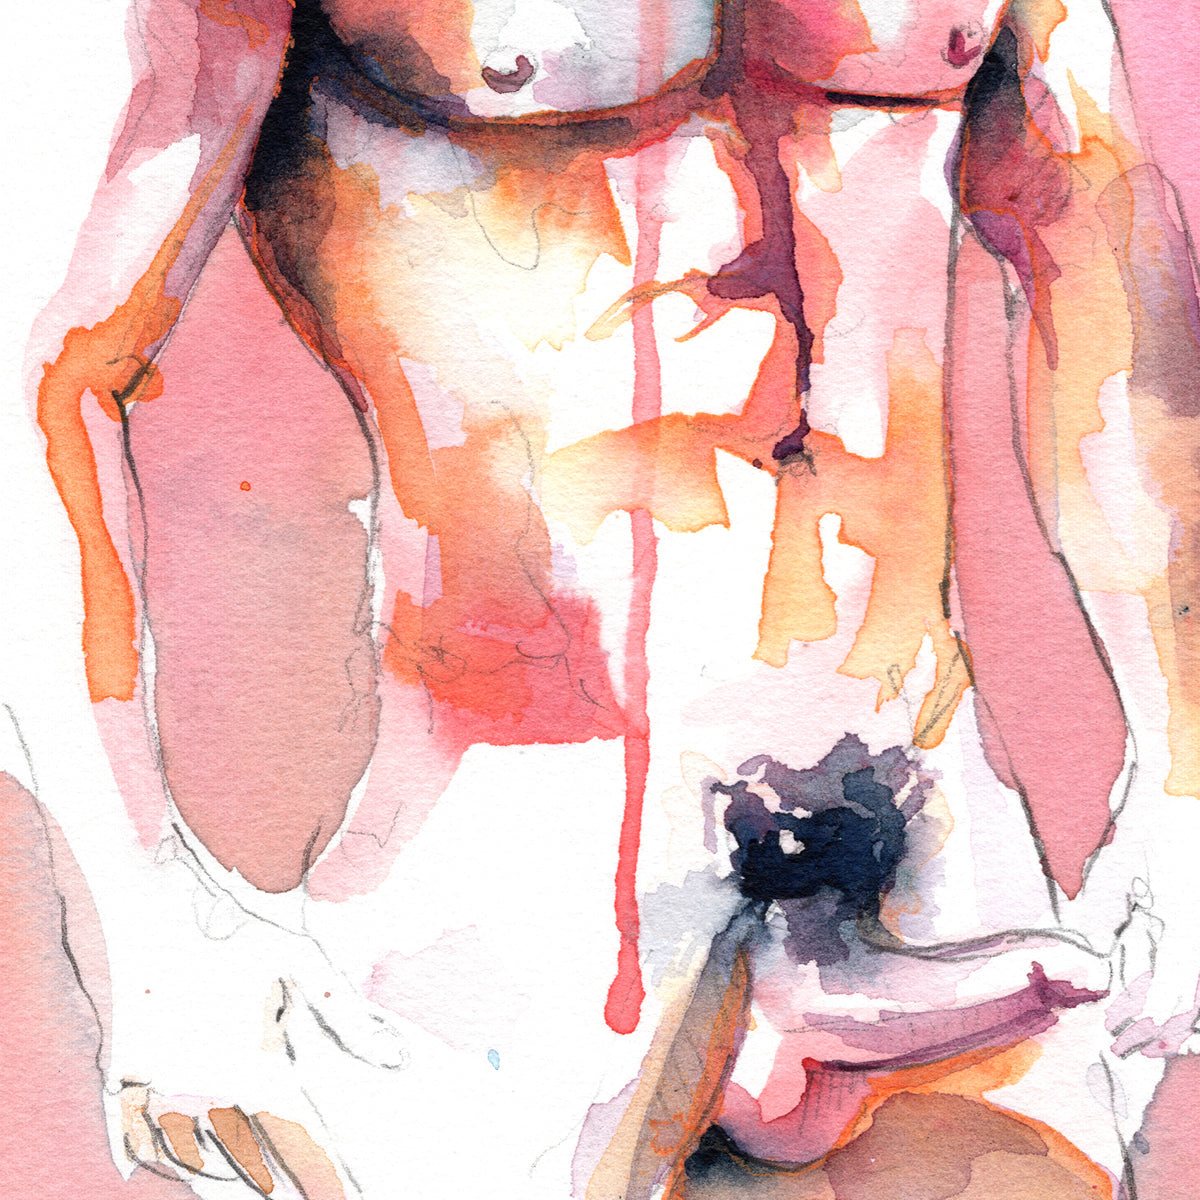 Rosy Resilience - Hairy-Chested Bearded Man Stands Bold - 6x9" Original Art